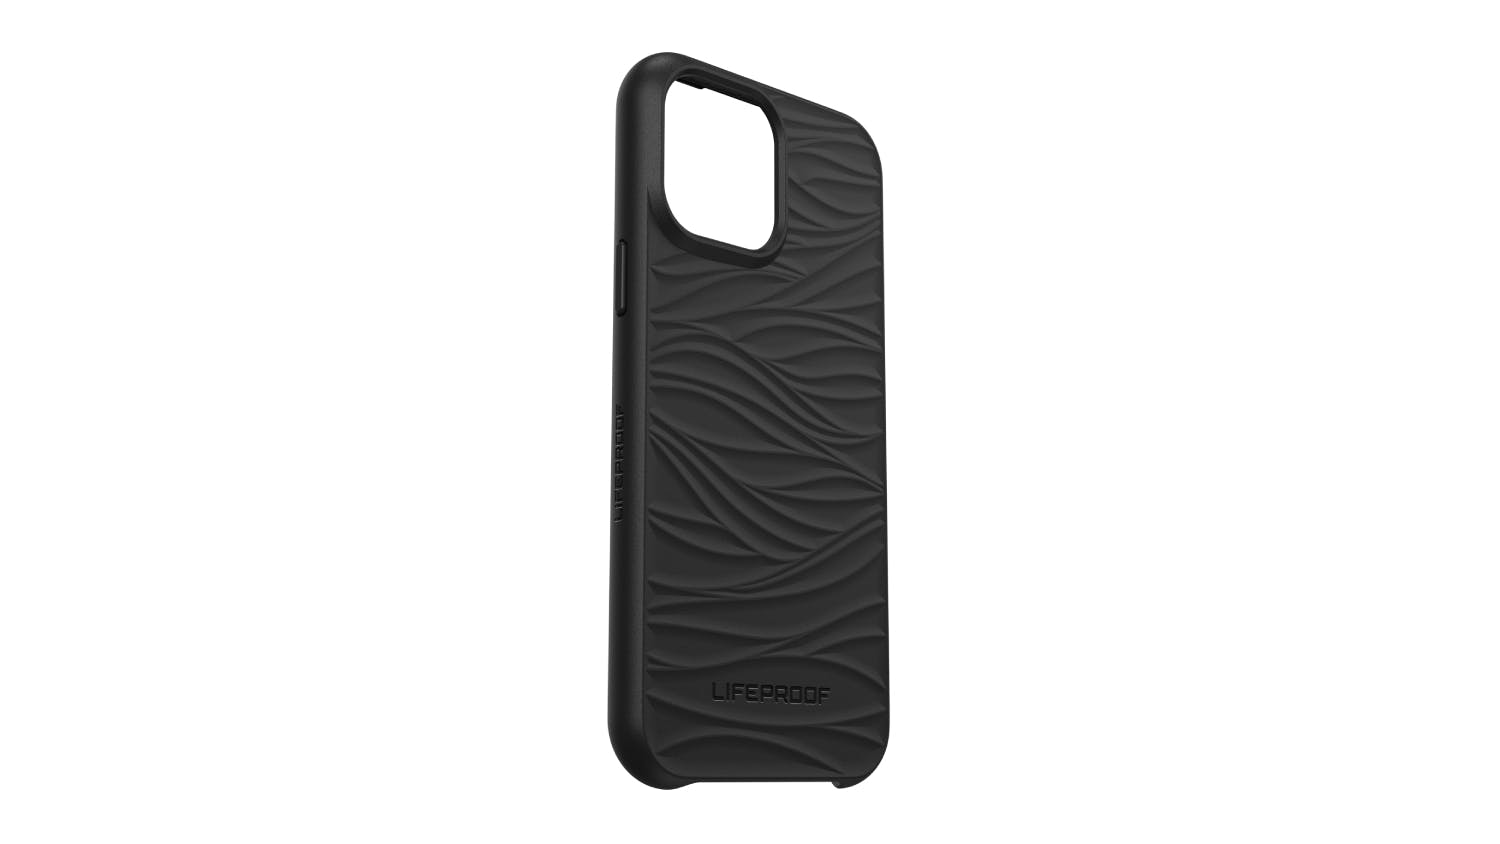 Lifeproof Wake Case for iPhone 13 Pro Max - Black